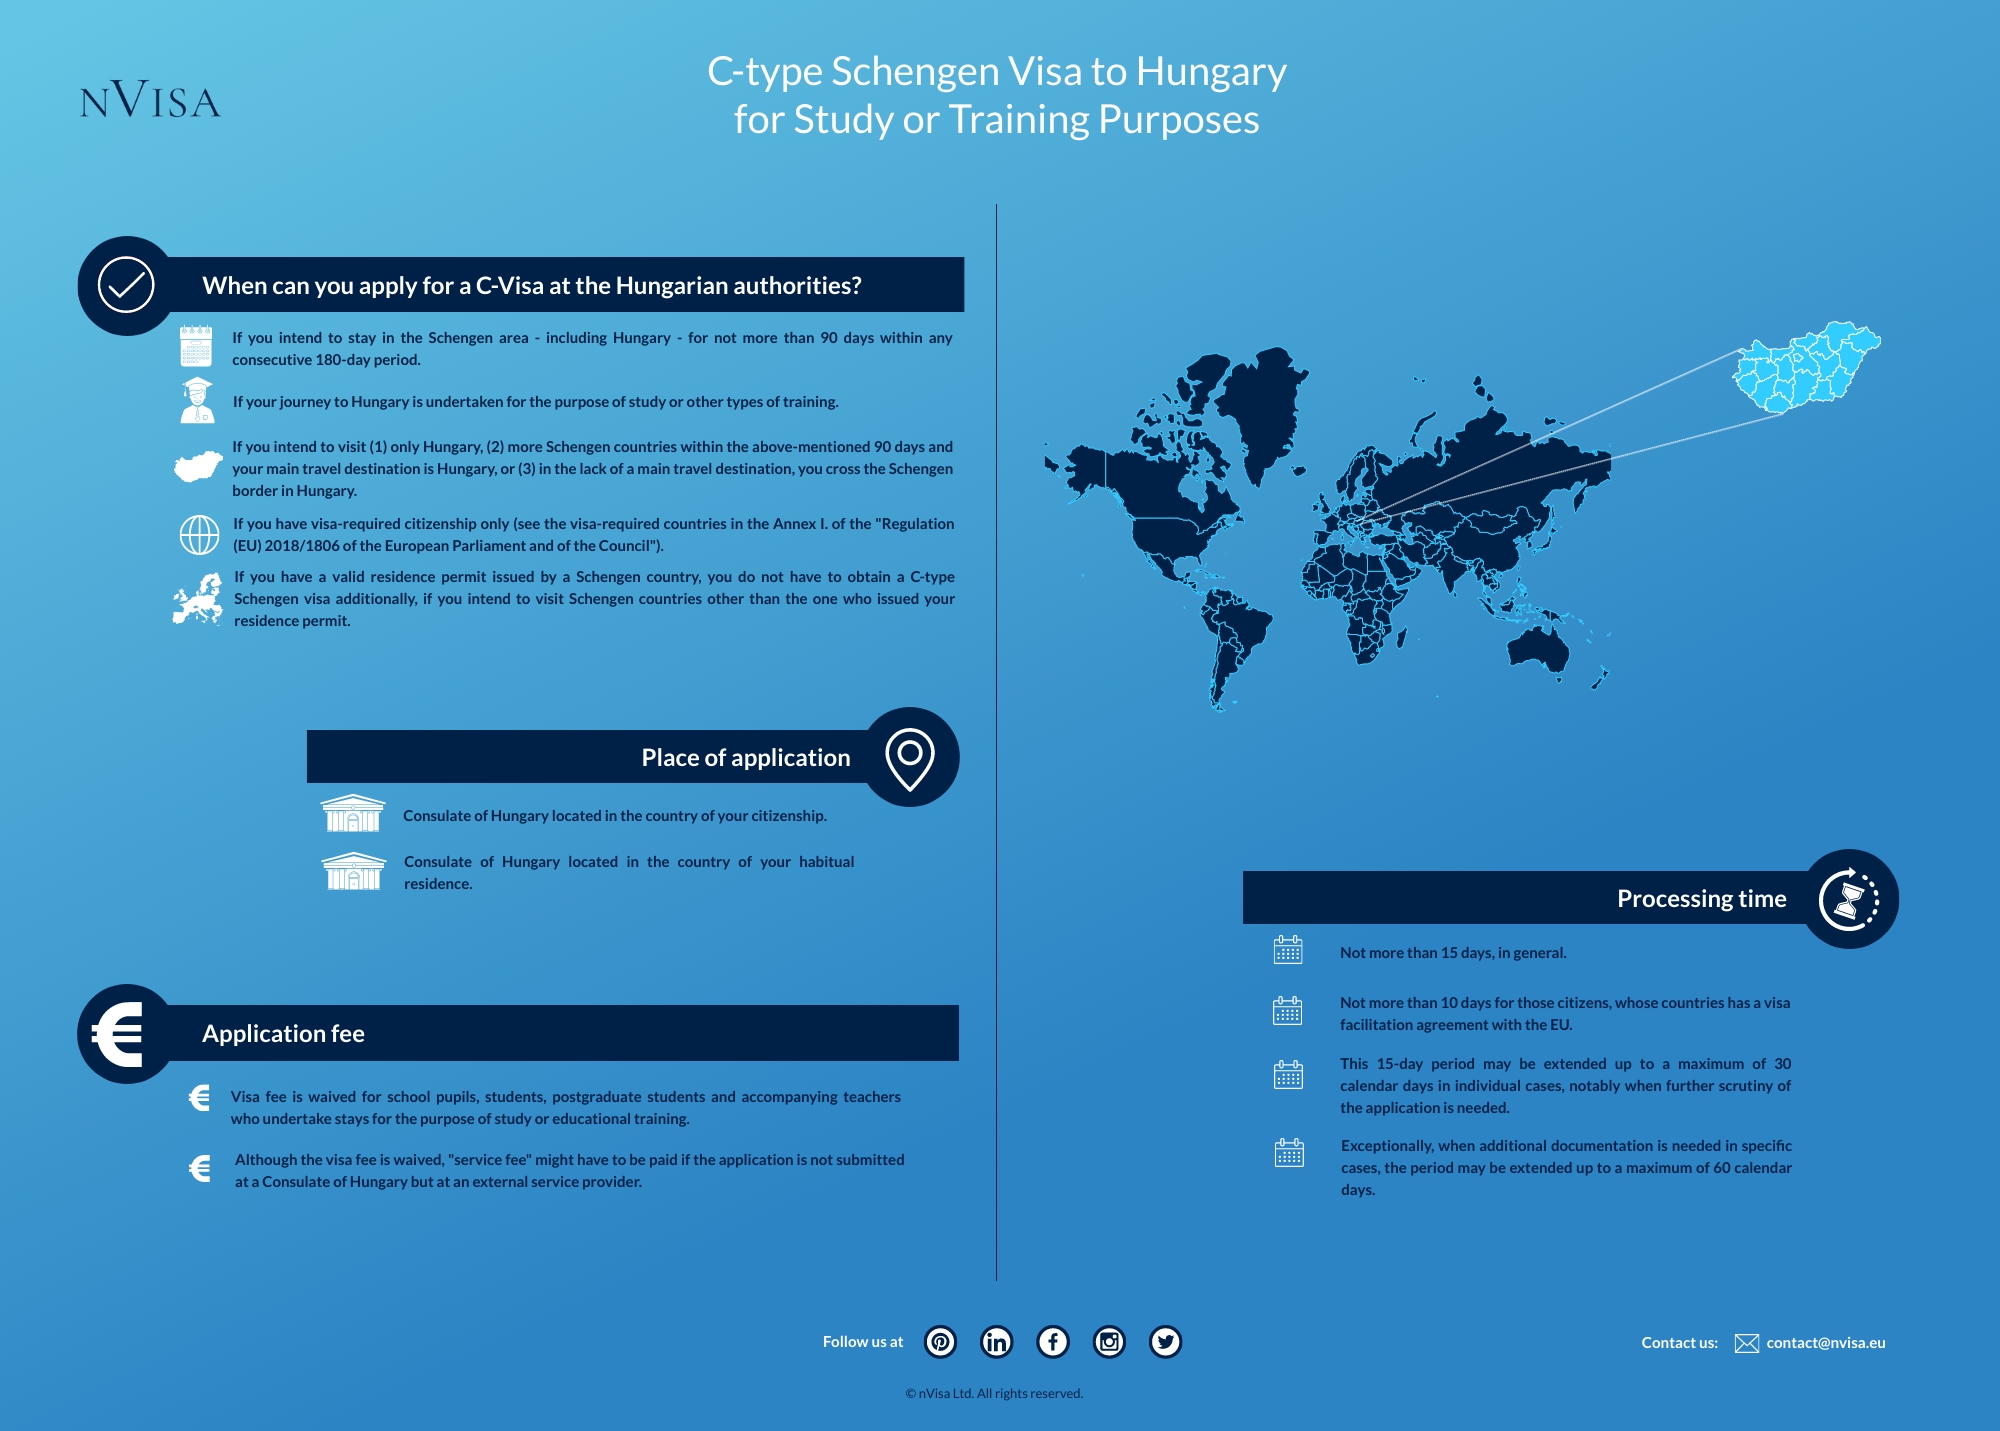 Infographic about immigration requirements and the details of obtaining a C-type Schengen Visa for the purpose of study or trainings in Hungary.